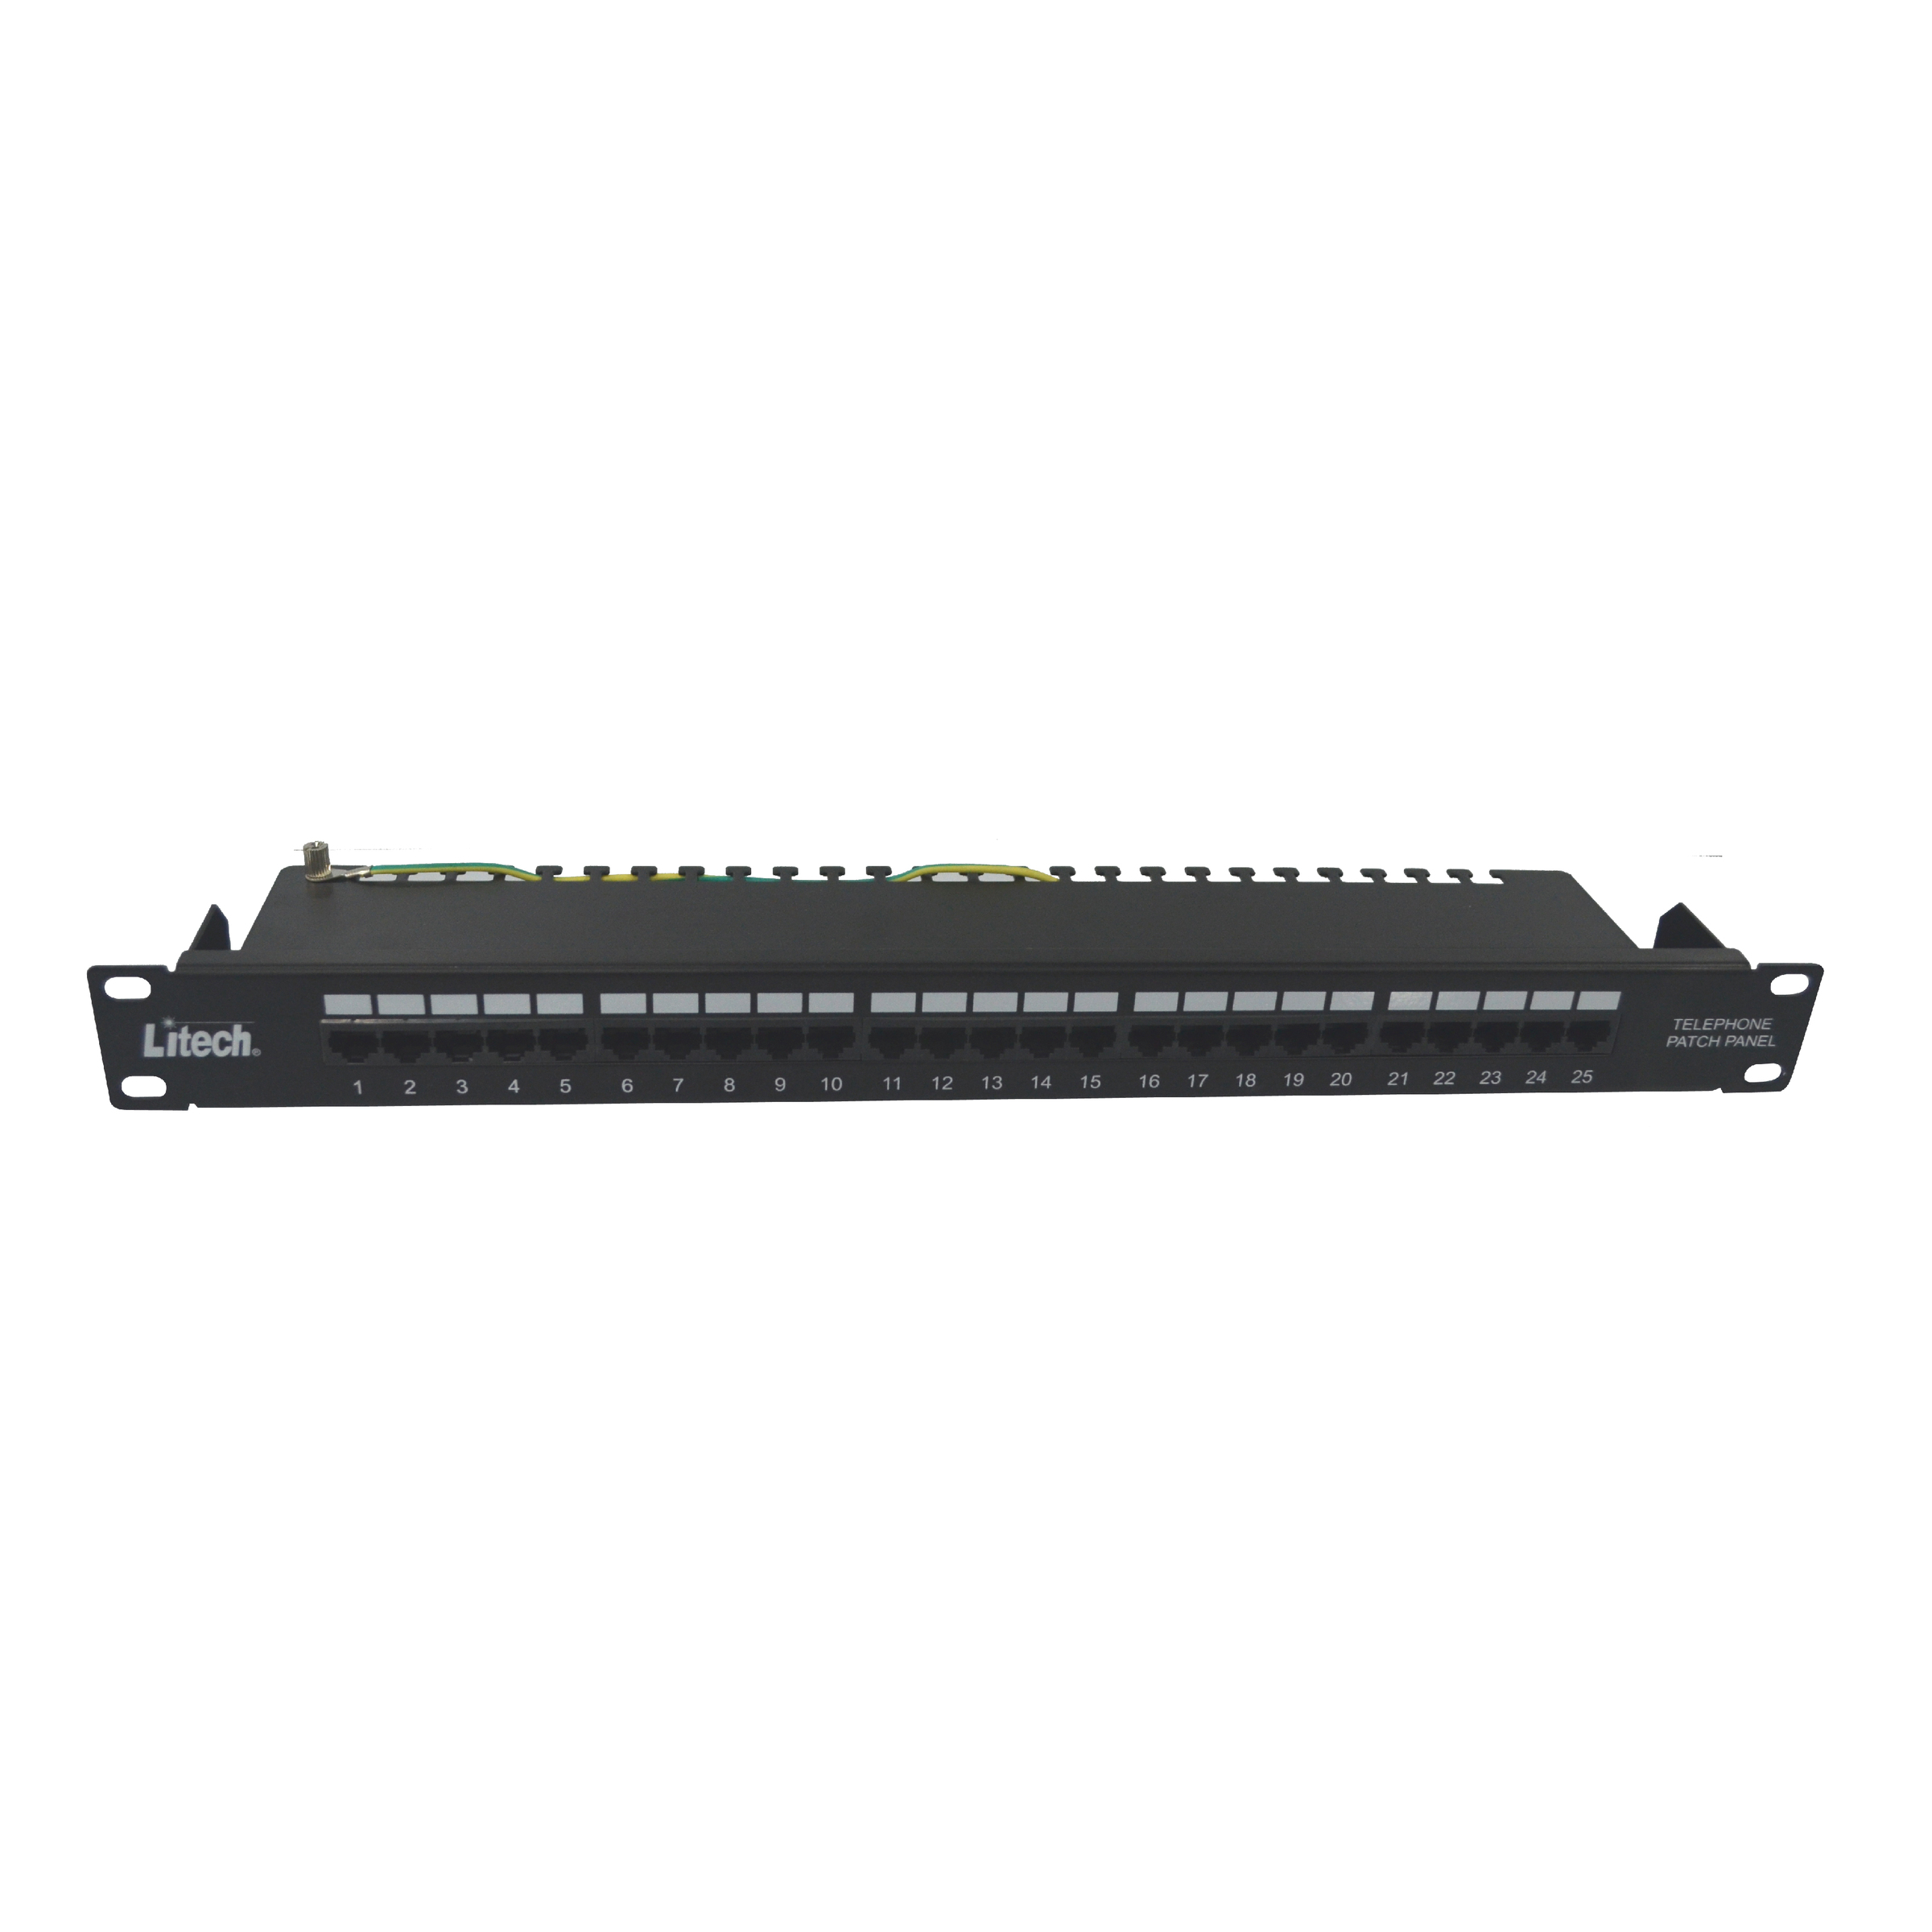 Voice & Data_Modular Connecting System_High Density Voice Patch Panel 25 Ports.jpg